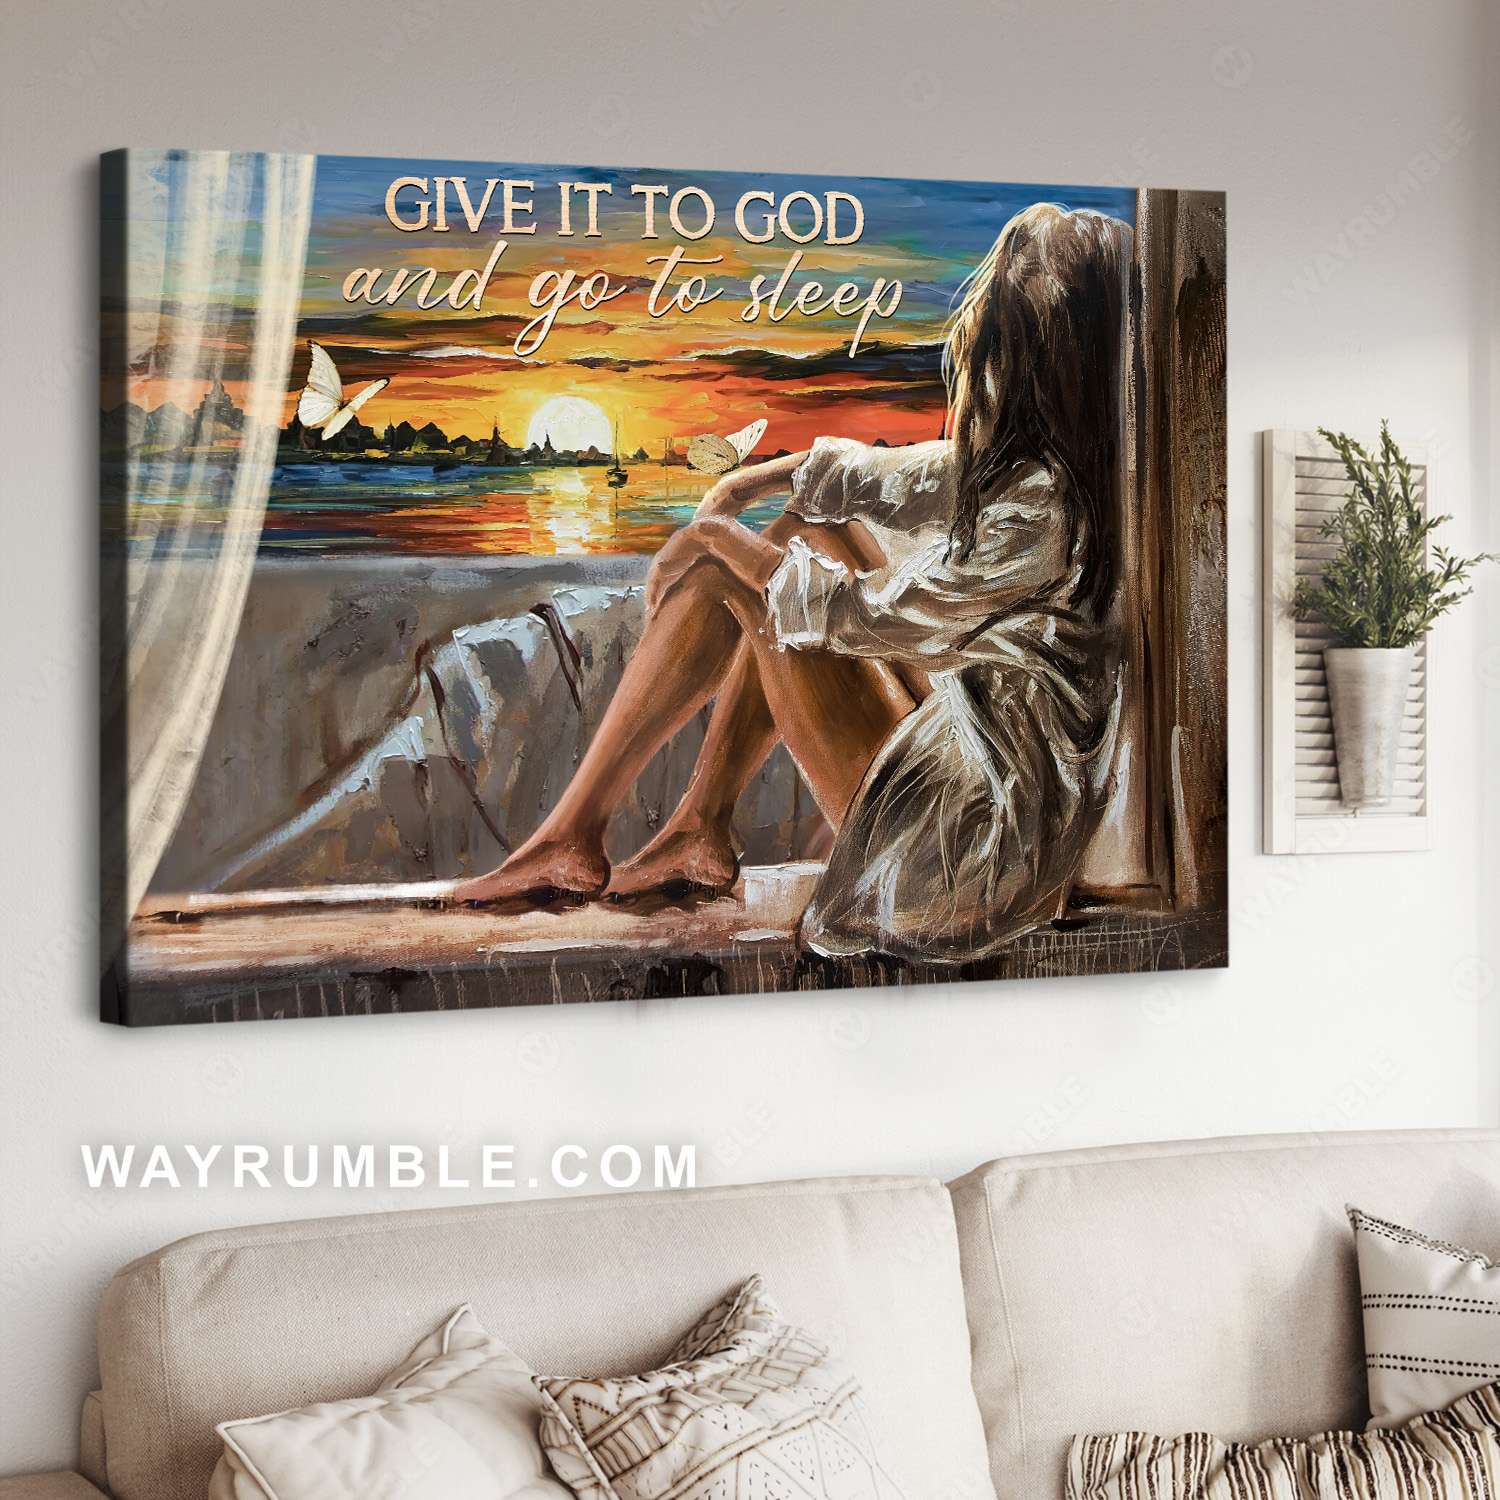 Pretty girl, Sunset sky, Ocean surface, Give it to God - Jesus Landscape Canvas Prints, Christian Wall Art